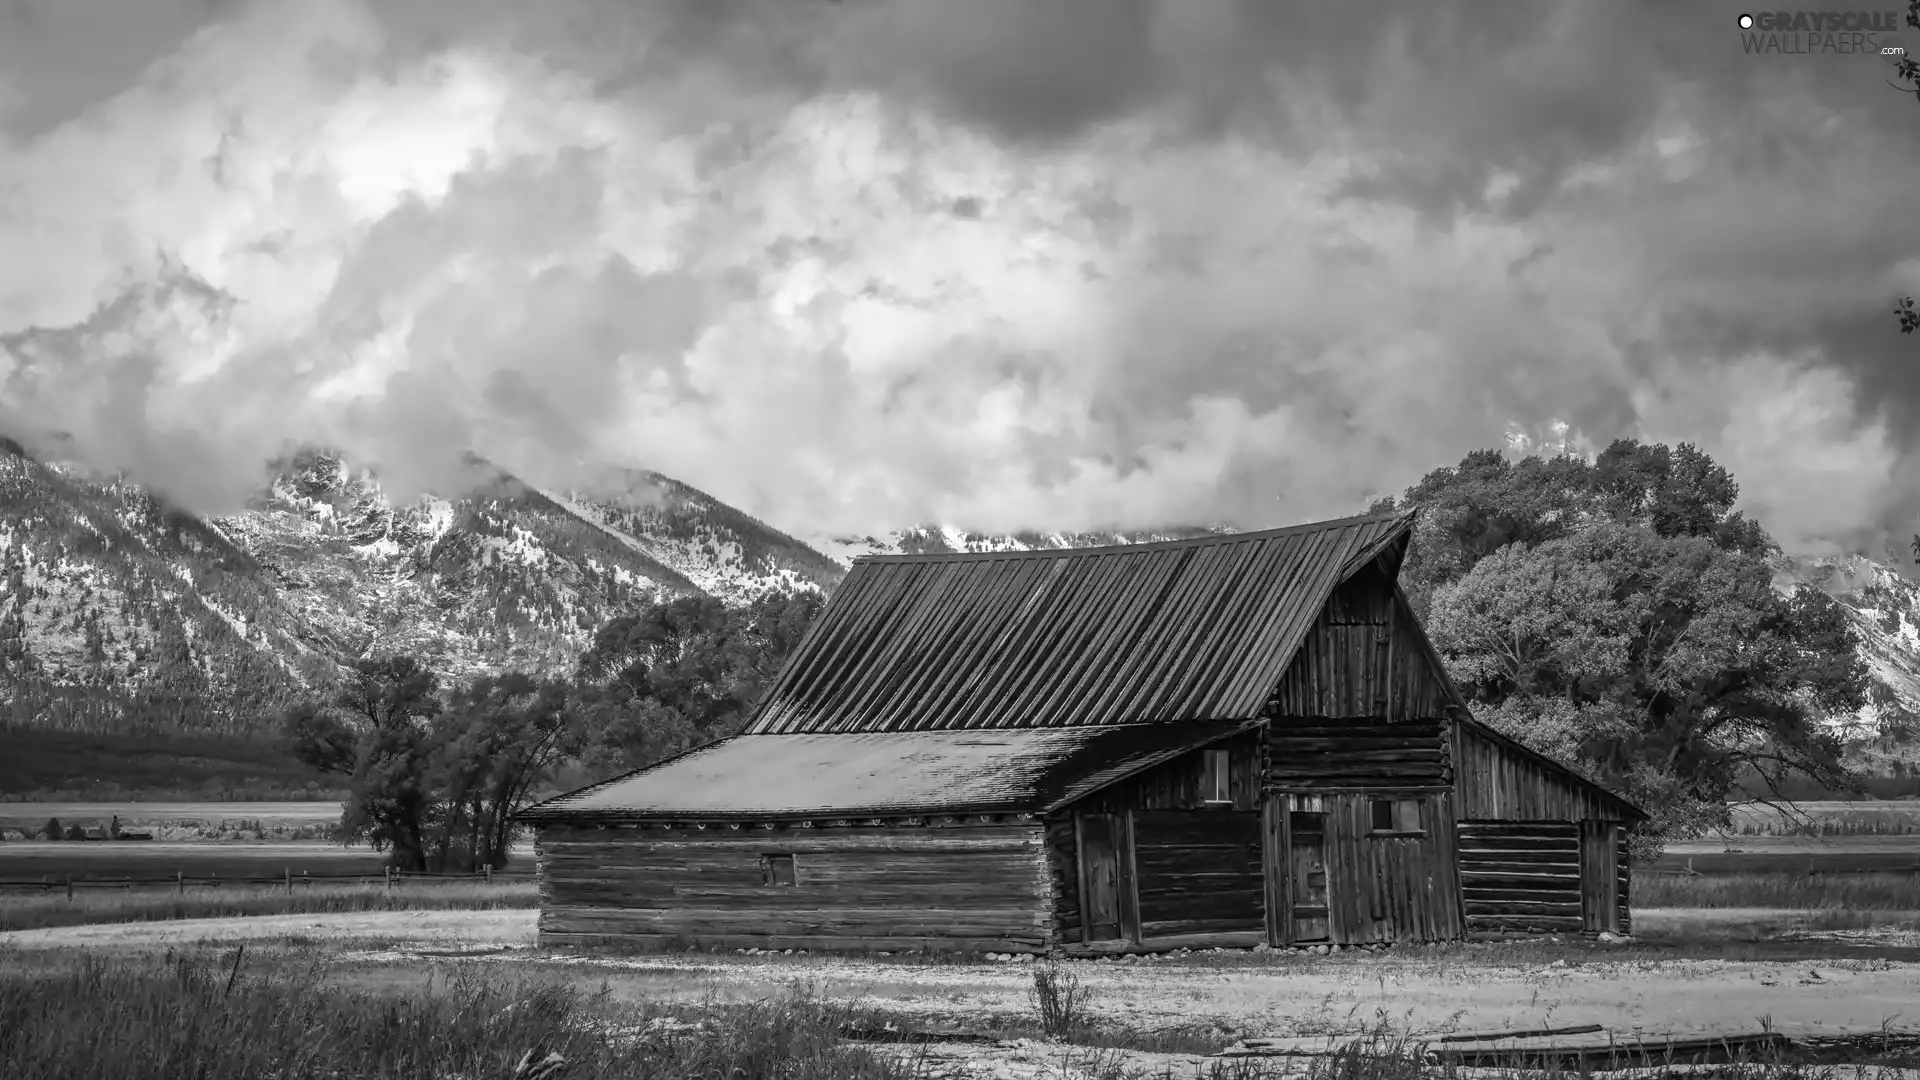 clouds, cottage, Teton Range Mountains, State of Wyoming, trees, Wooden, Barn, The United States, Grand Teton National Park, viewes